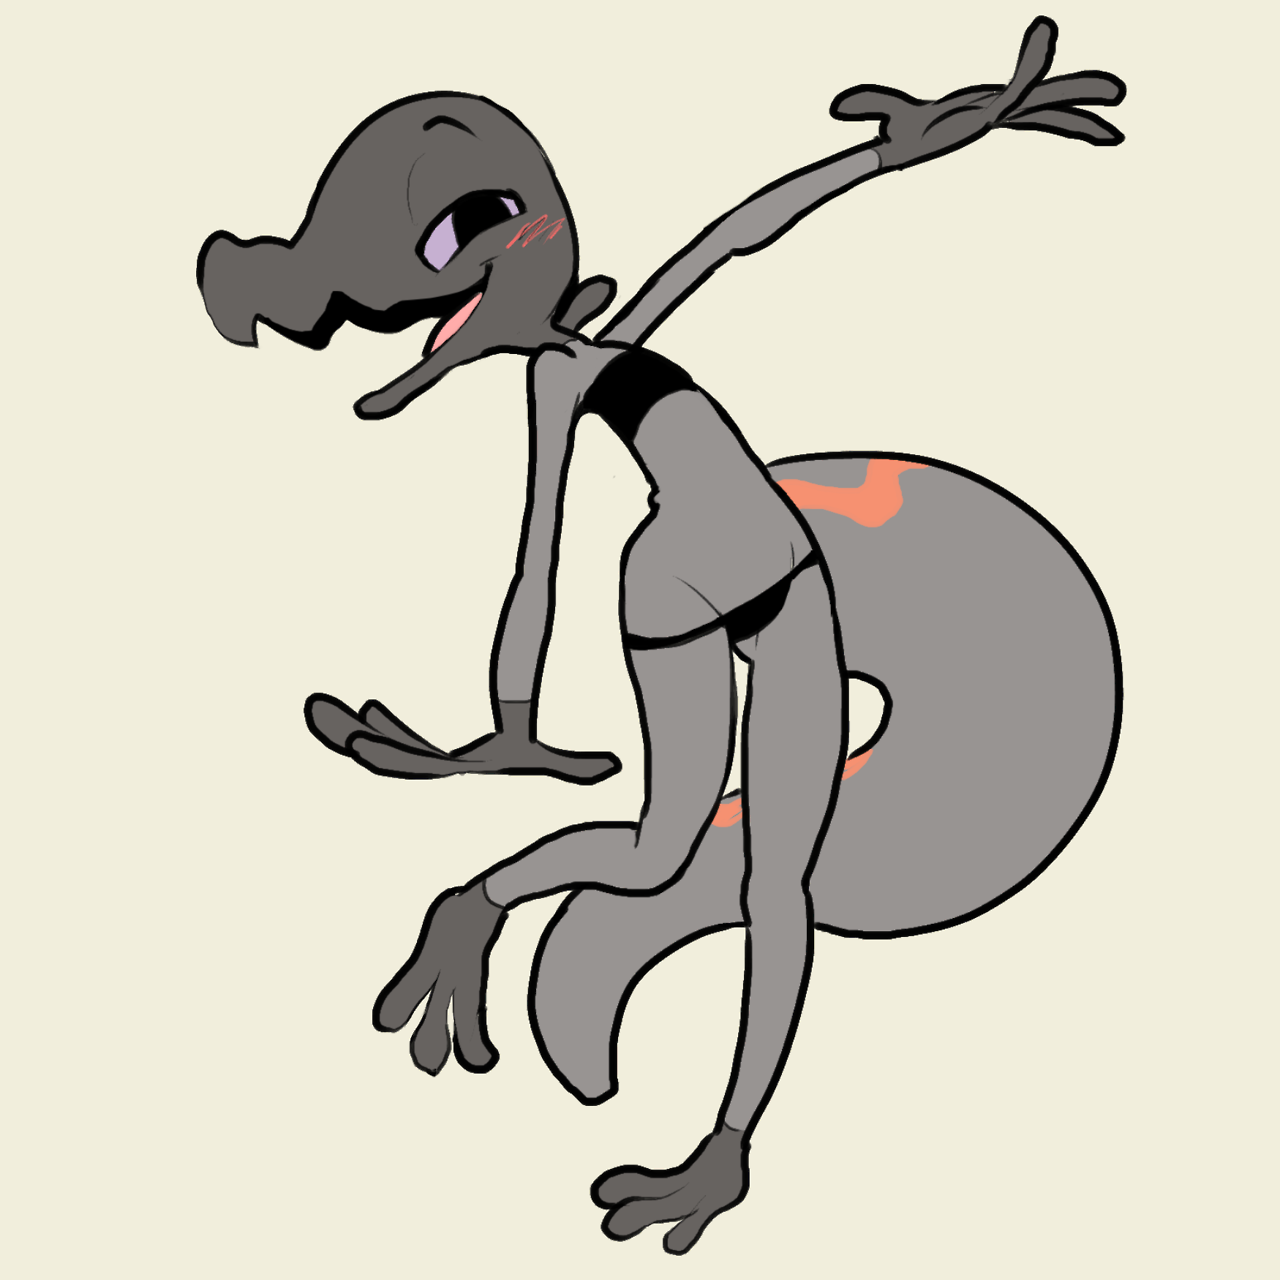 itsunknownanon: Allow me to grace you with the best lizard~ I’ll fight anyone who